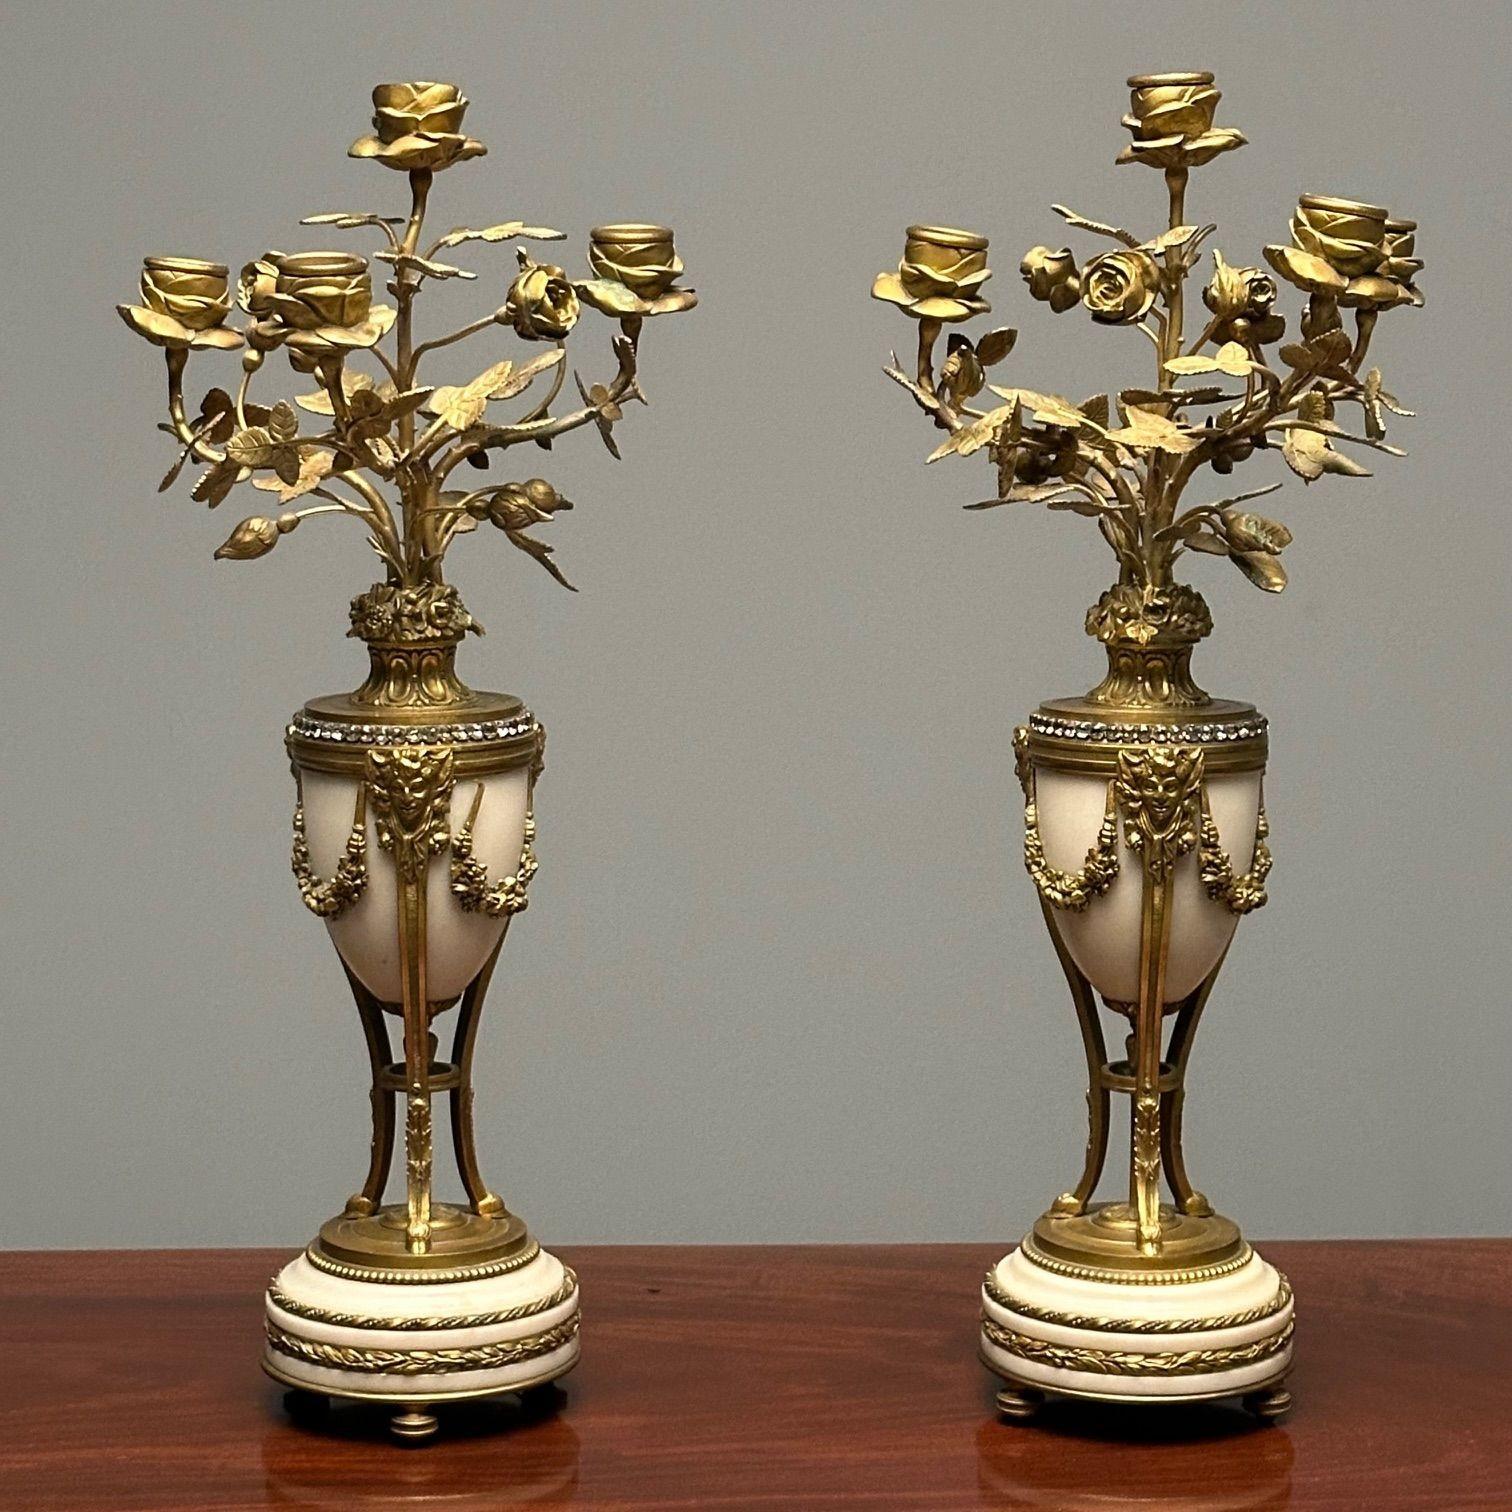 Pair of Louis XVI Style Gilt-Metal and White Marble Four-Light Candelabra

Each with a 'jeweled' urn-form standard continuing to hoof feet, raised on a circular base, on squat toupie feet. The pair with satirical masks with wreath bodies.

Height: